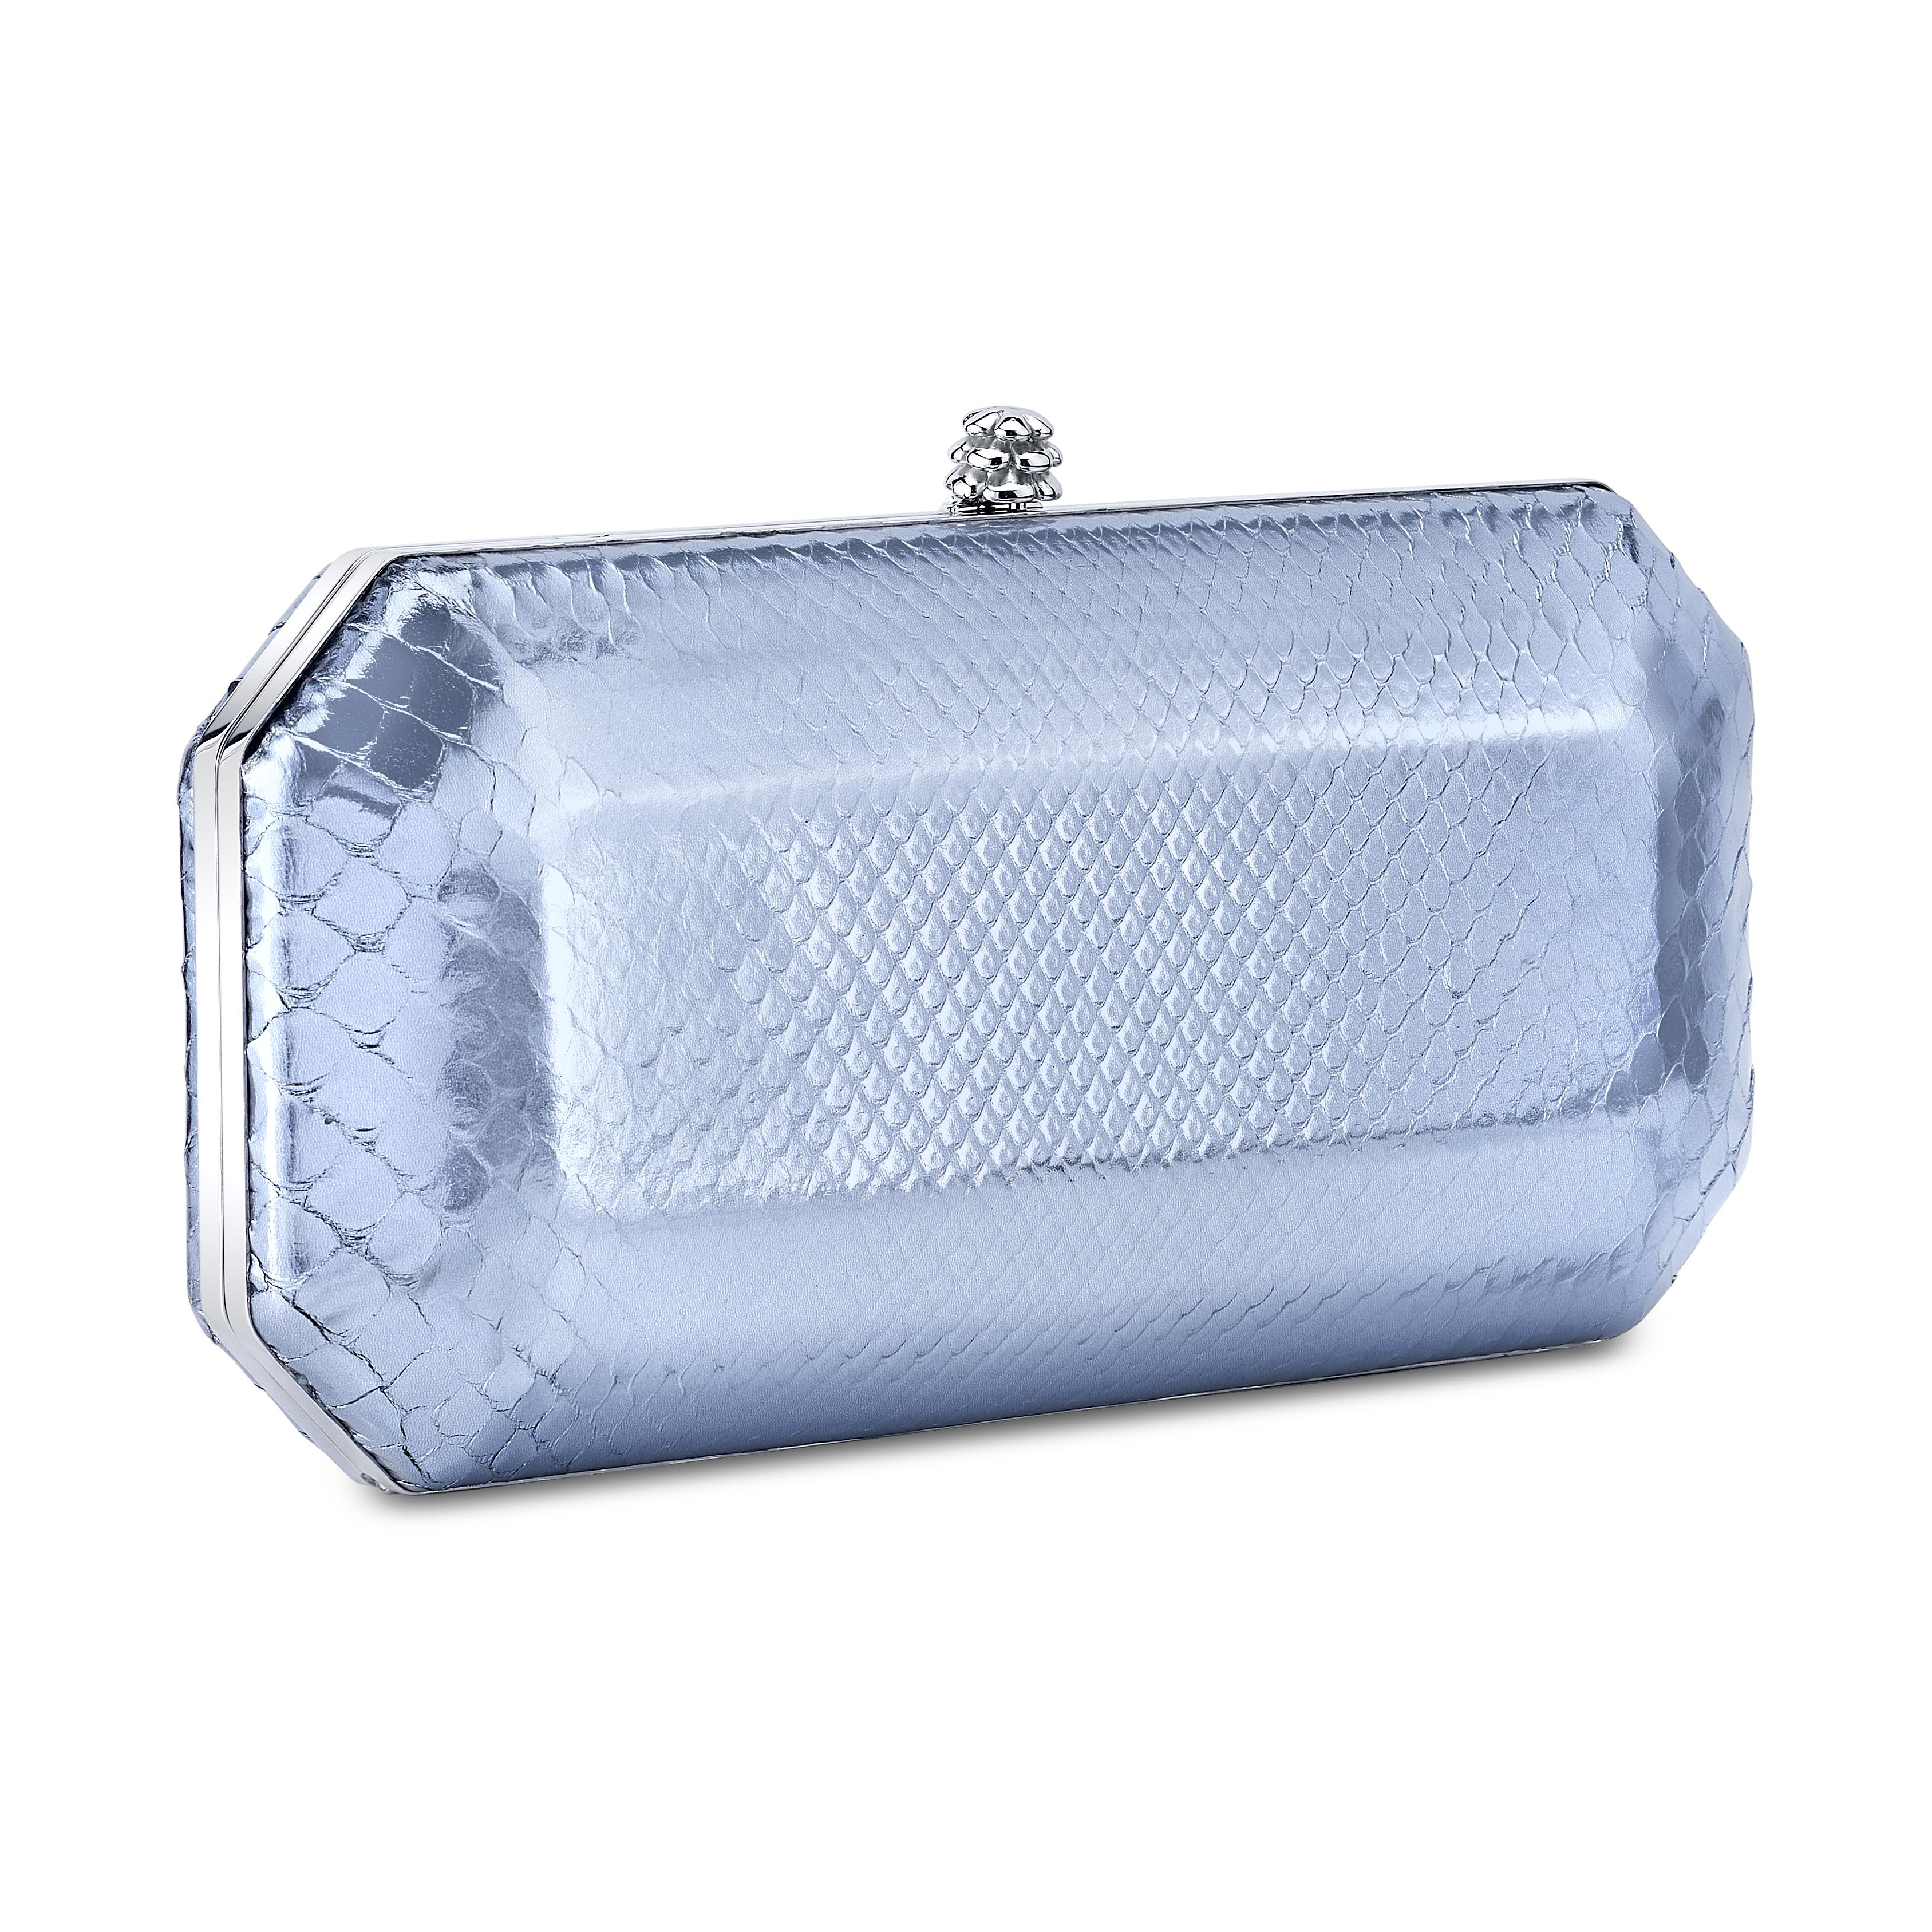 The Perry in Glacier Blue Python is a hard-framed clutch designed with interior pockets and an optional silver cross-body chain. Its elegant emerald shape is inspired by Tyler’s own engagement ring and named after her father, Perry Ellis. It fits